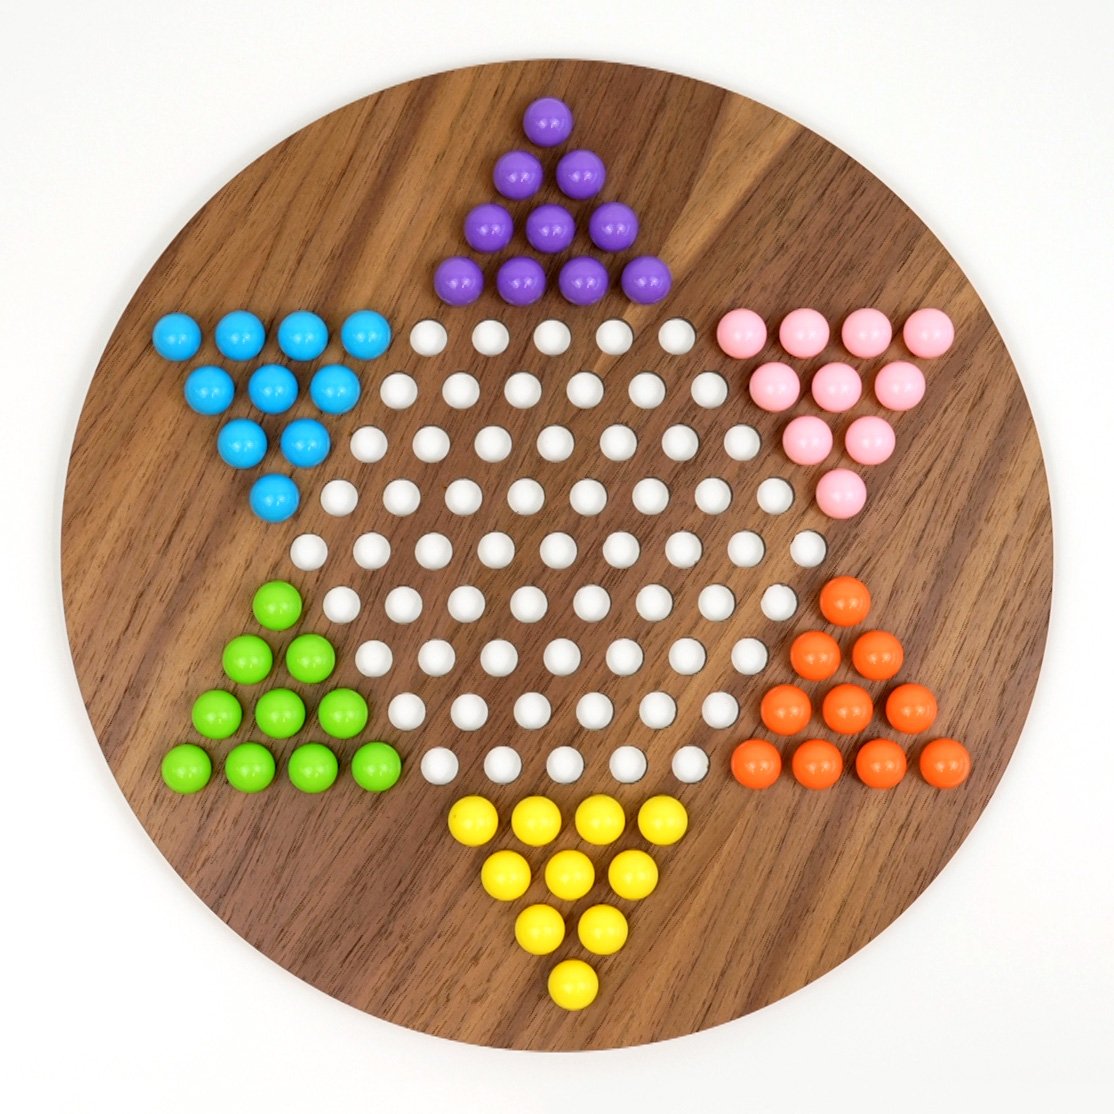 Chinese Checkers Game Board on white background